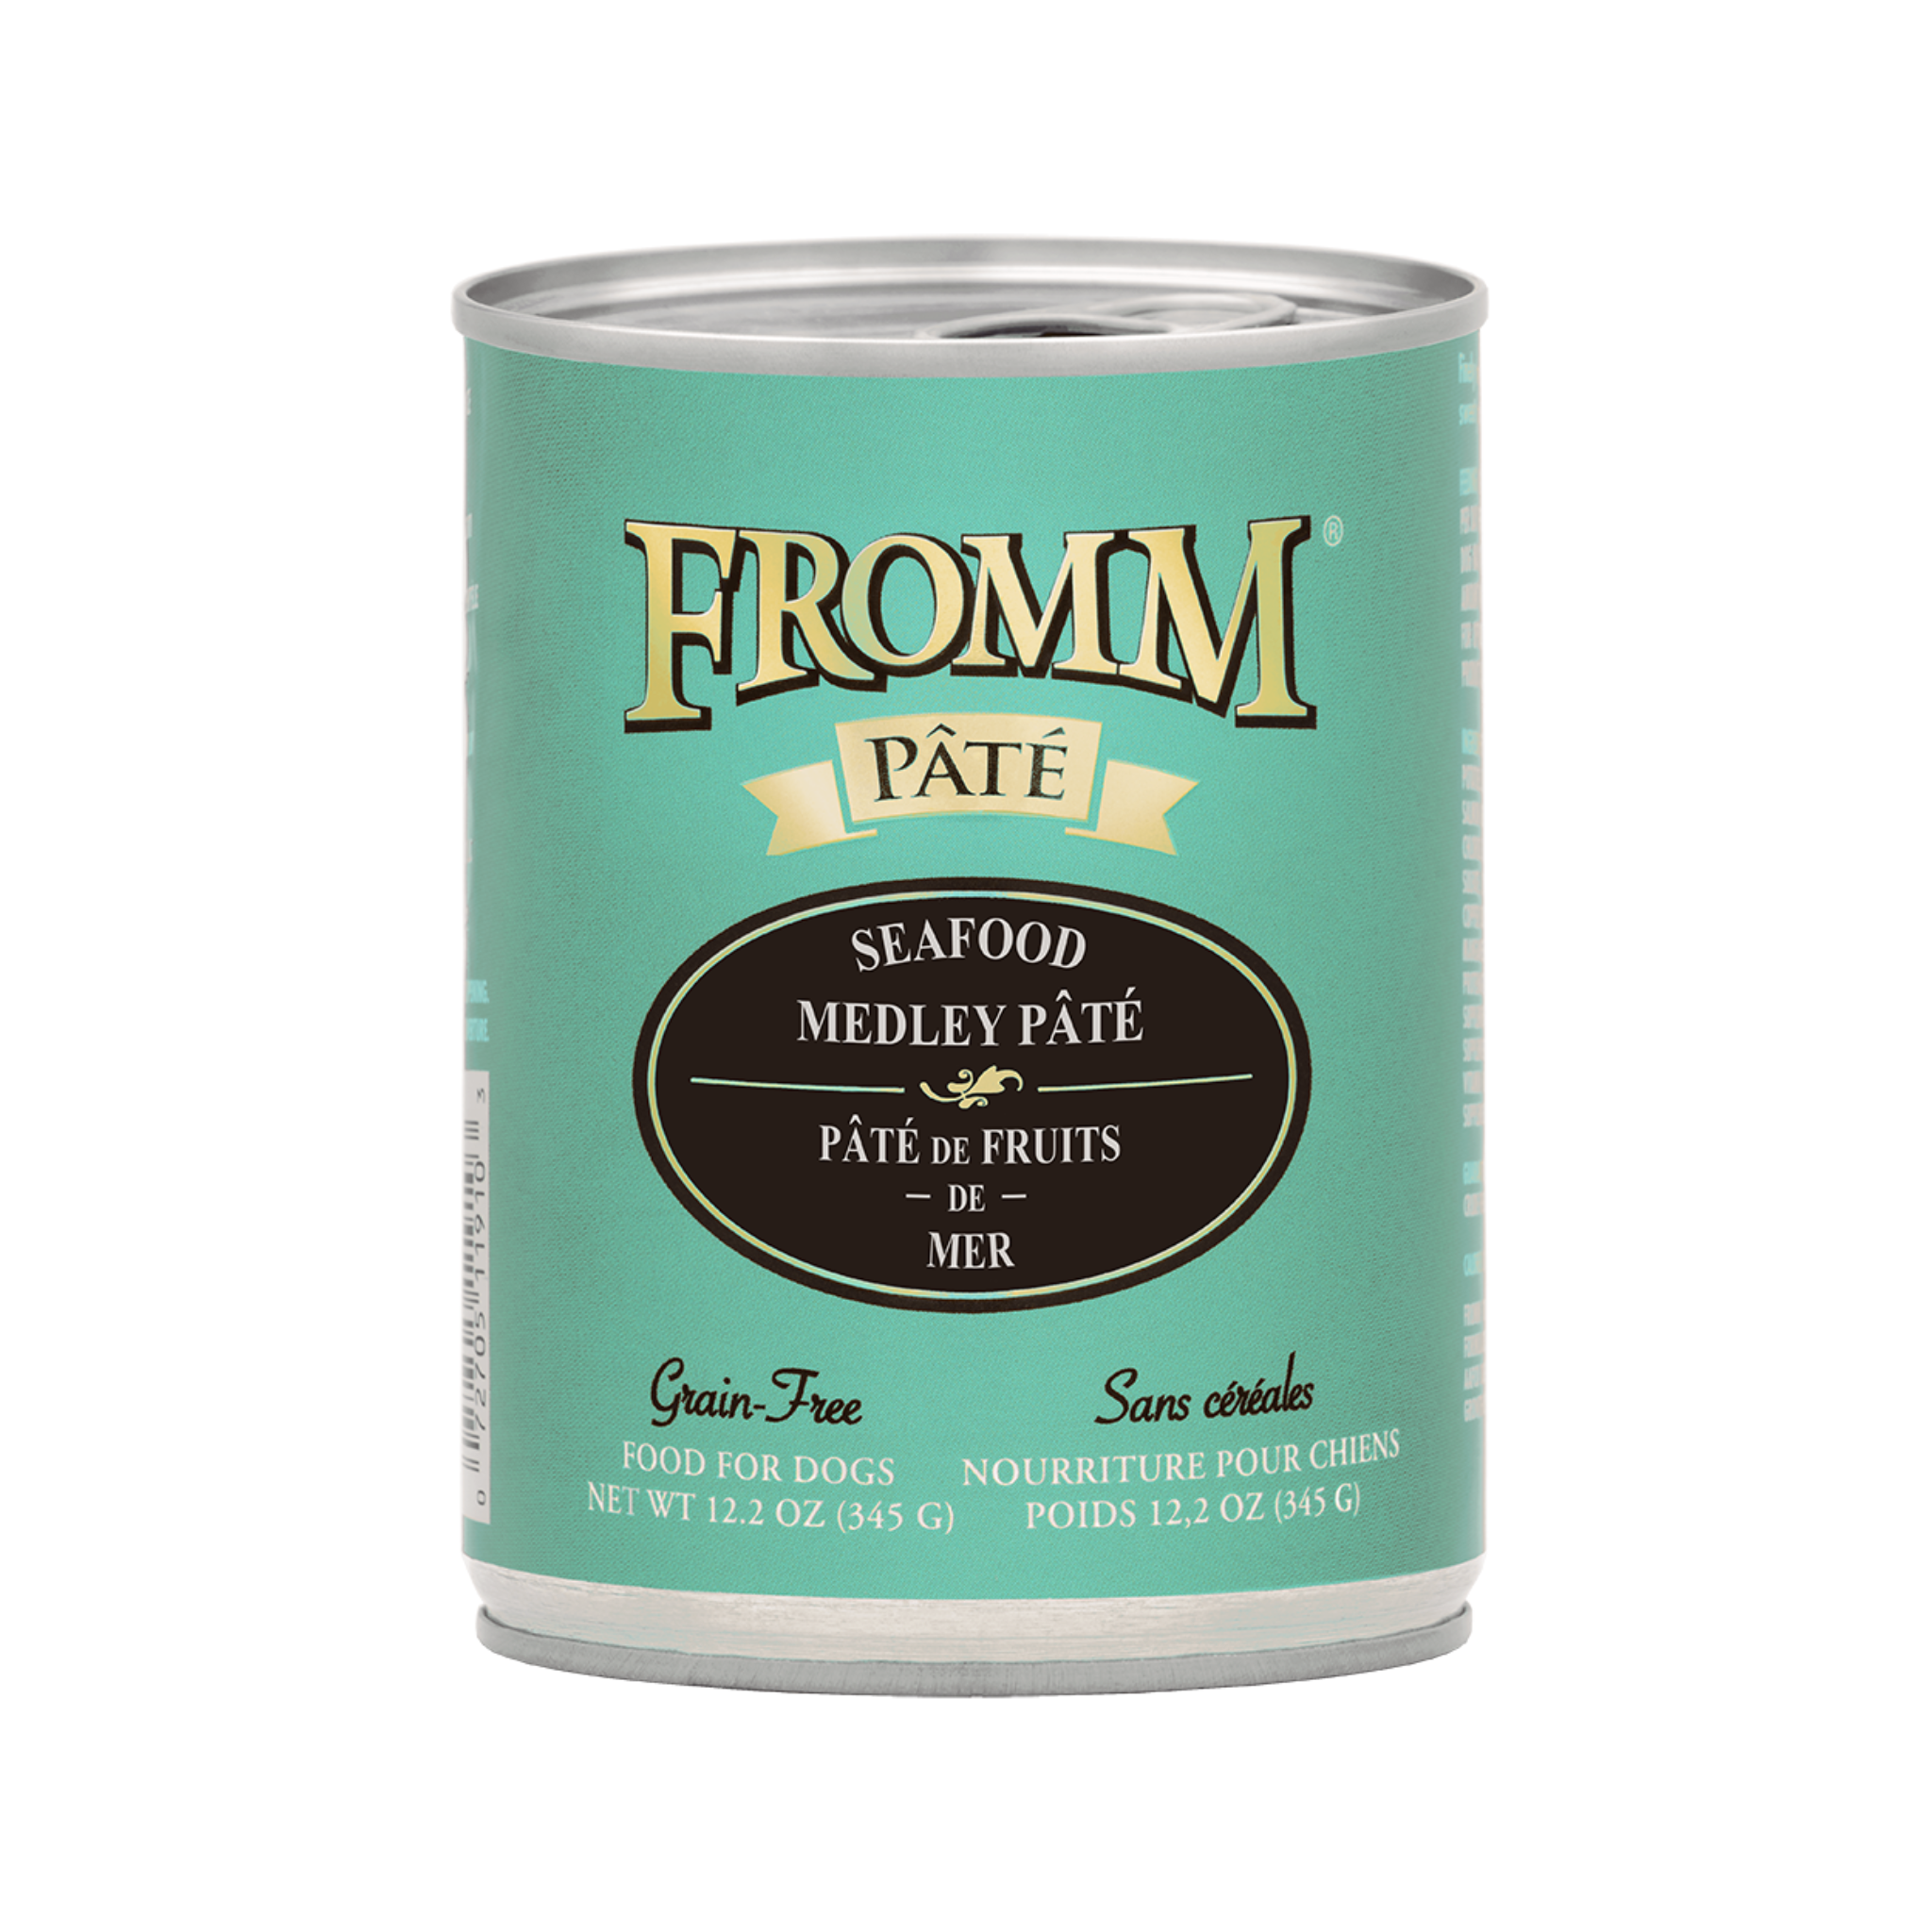 Fromm Seafood Medley Pate Dog Canned